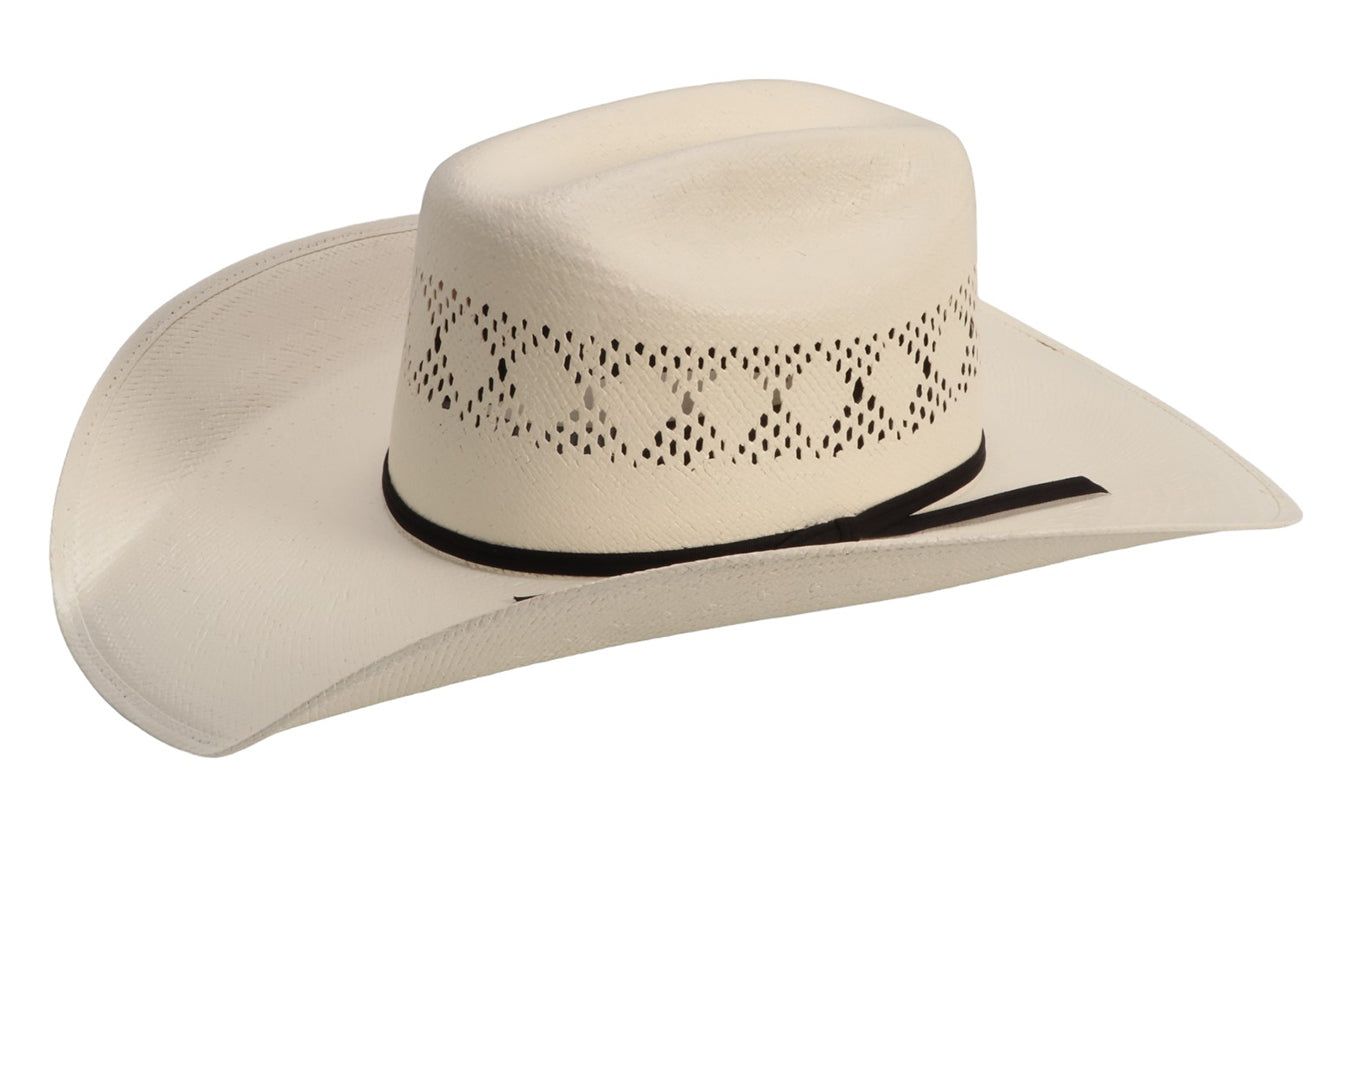 Gone Country Hats - Gillette Straw Hat